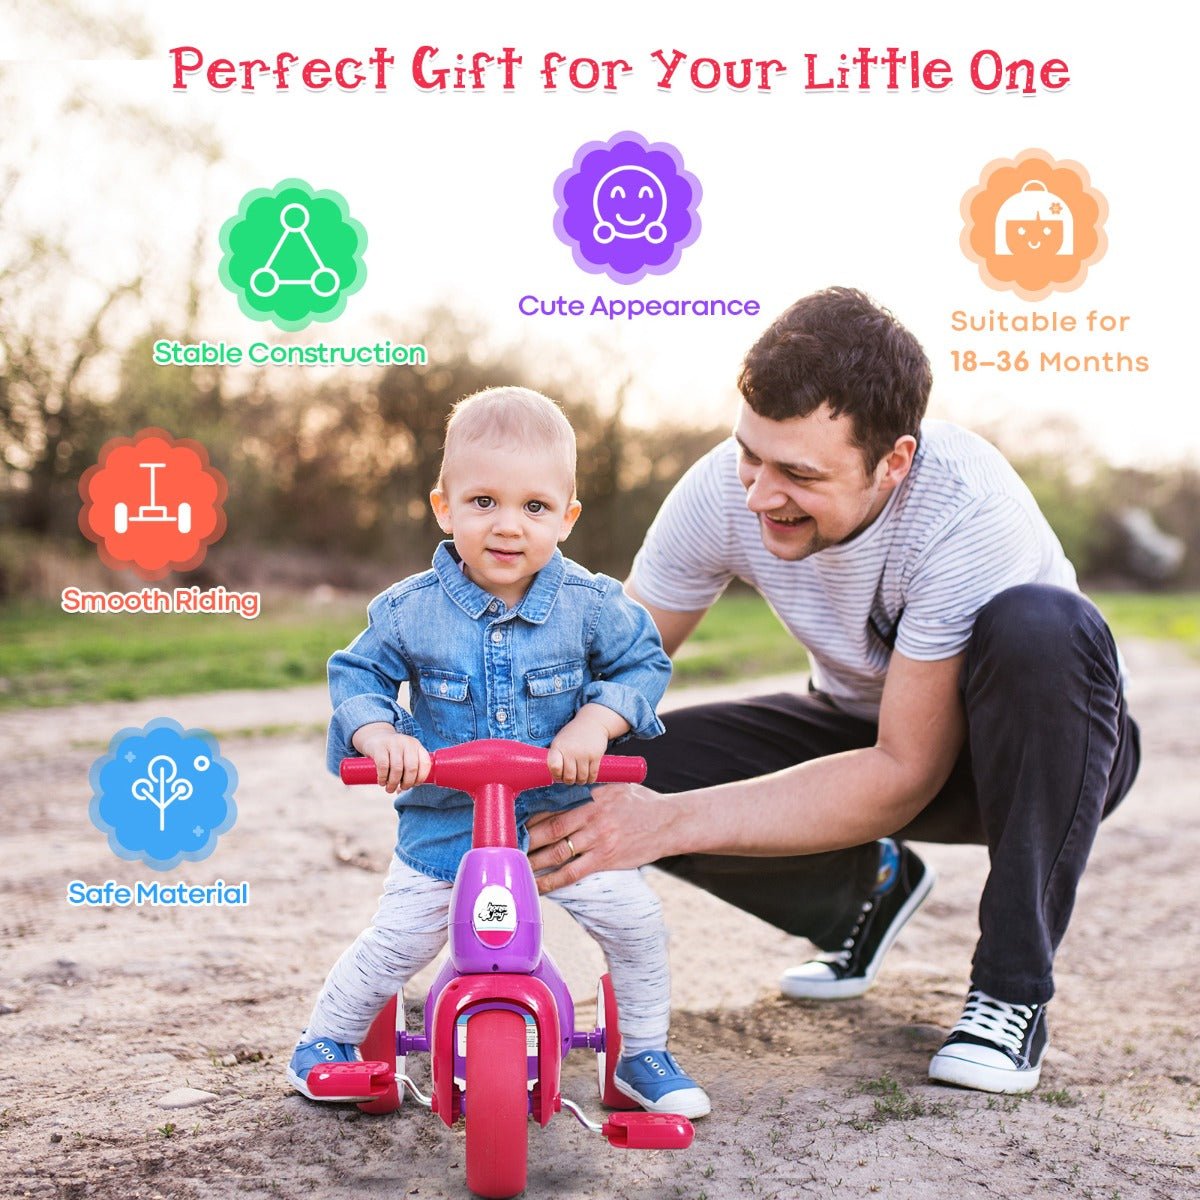 Pedal and Play: Pink Toddler Tricycle with Foot Pedals for Kids